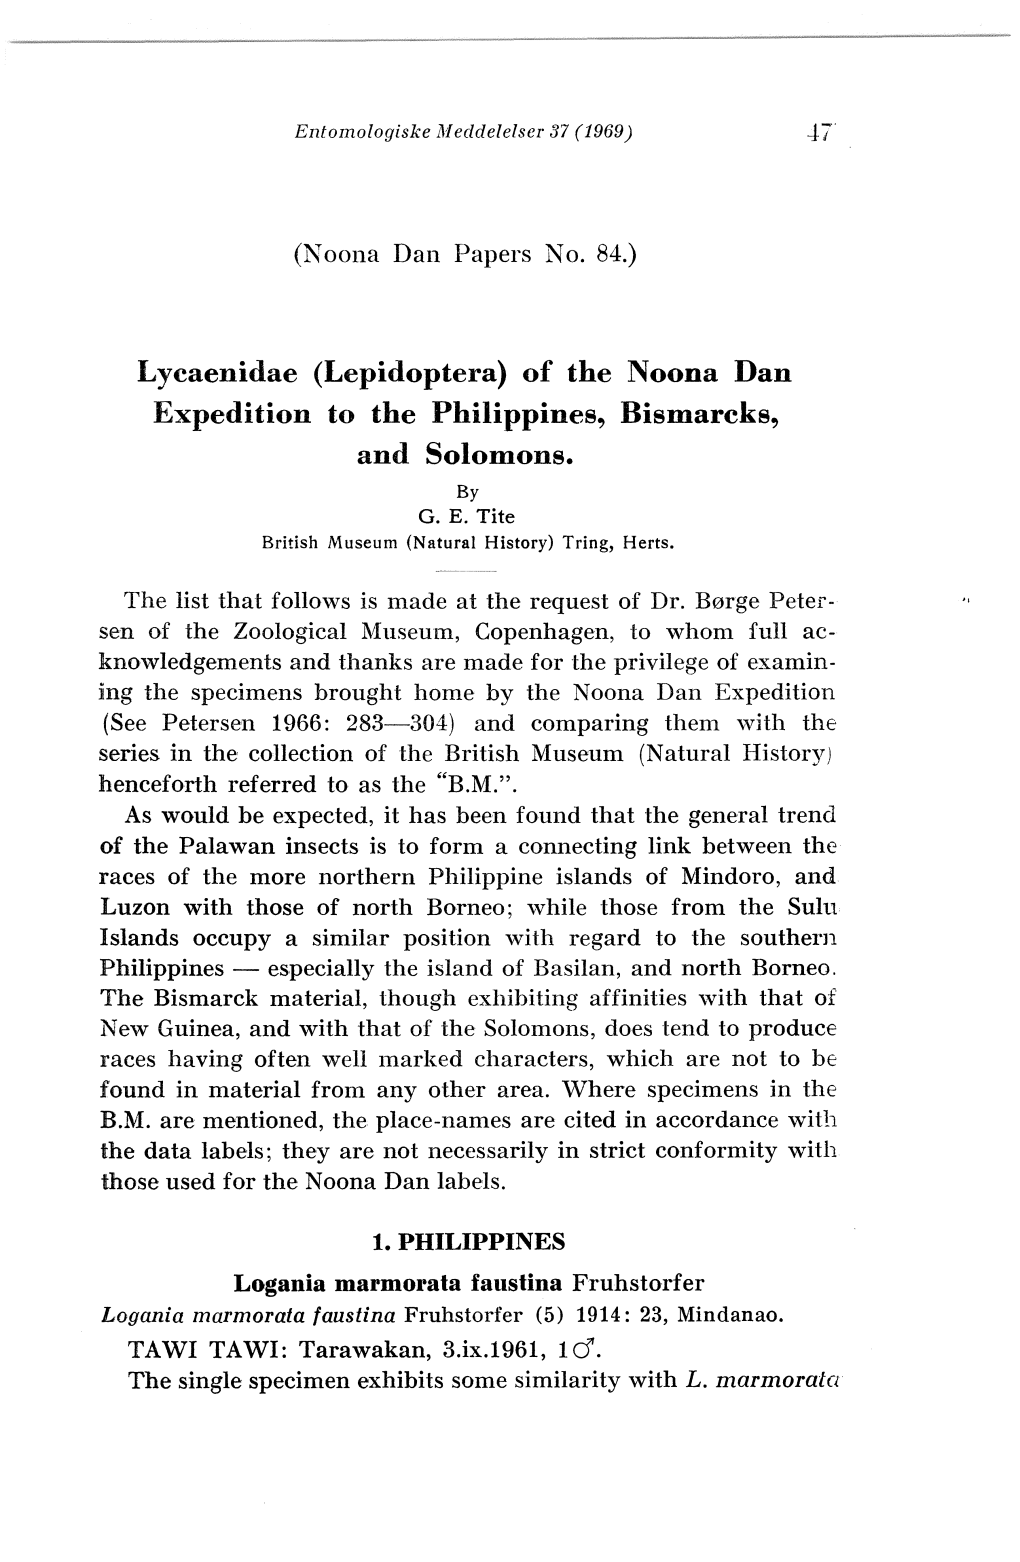 Lepidoptera) of the Noona Dan Expedition to the Philippines, Bismarcks, and Solomons